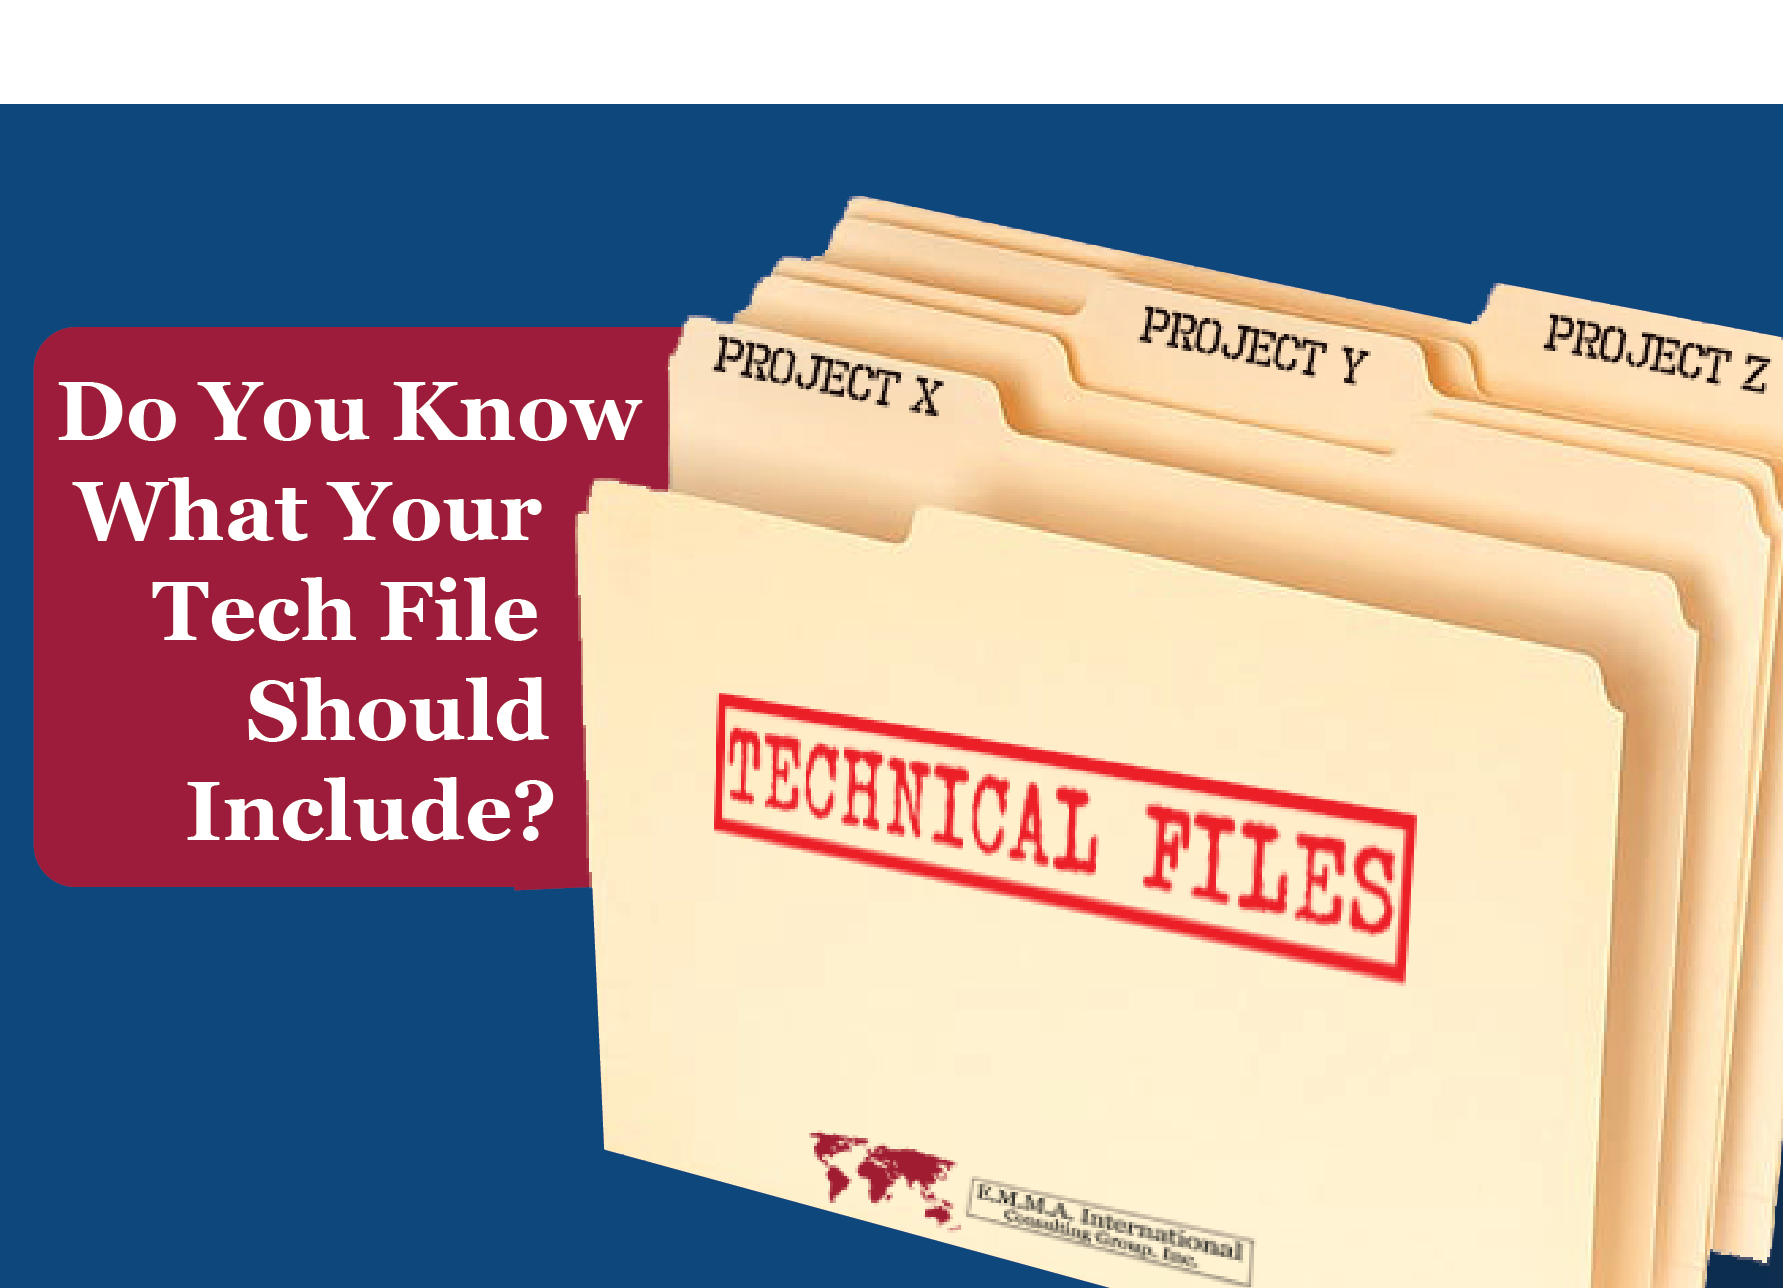 Do You Know What Your Tech File Should Include?